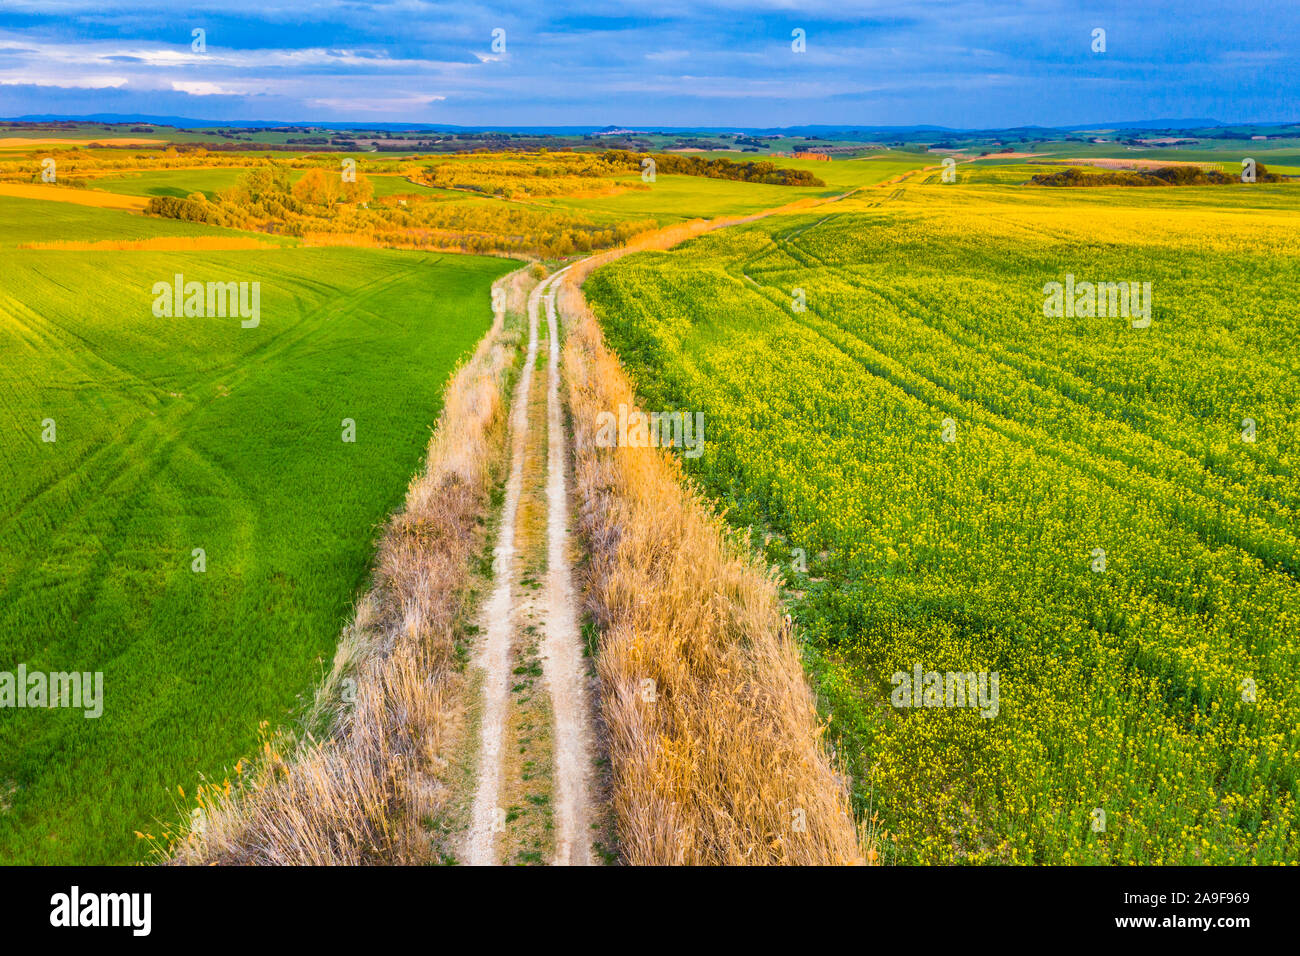 Agricultural aerial landscape. Stock Photo